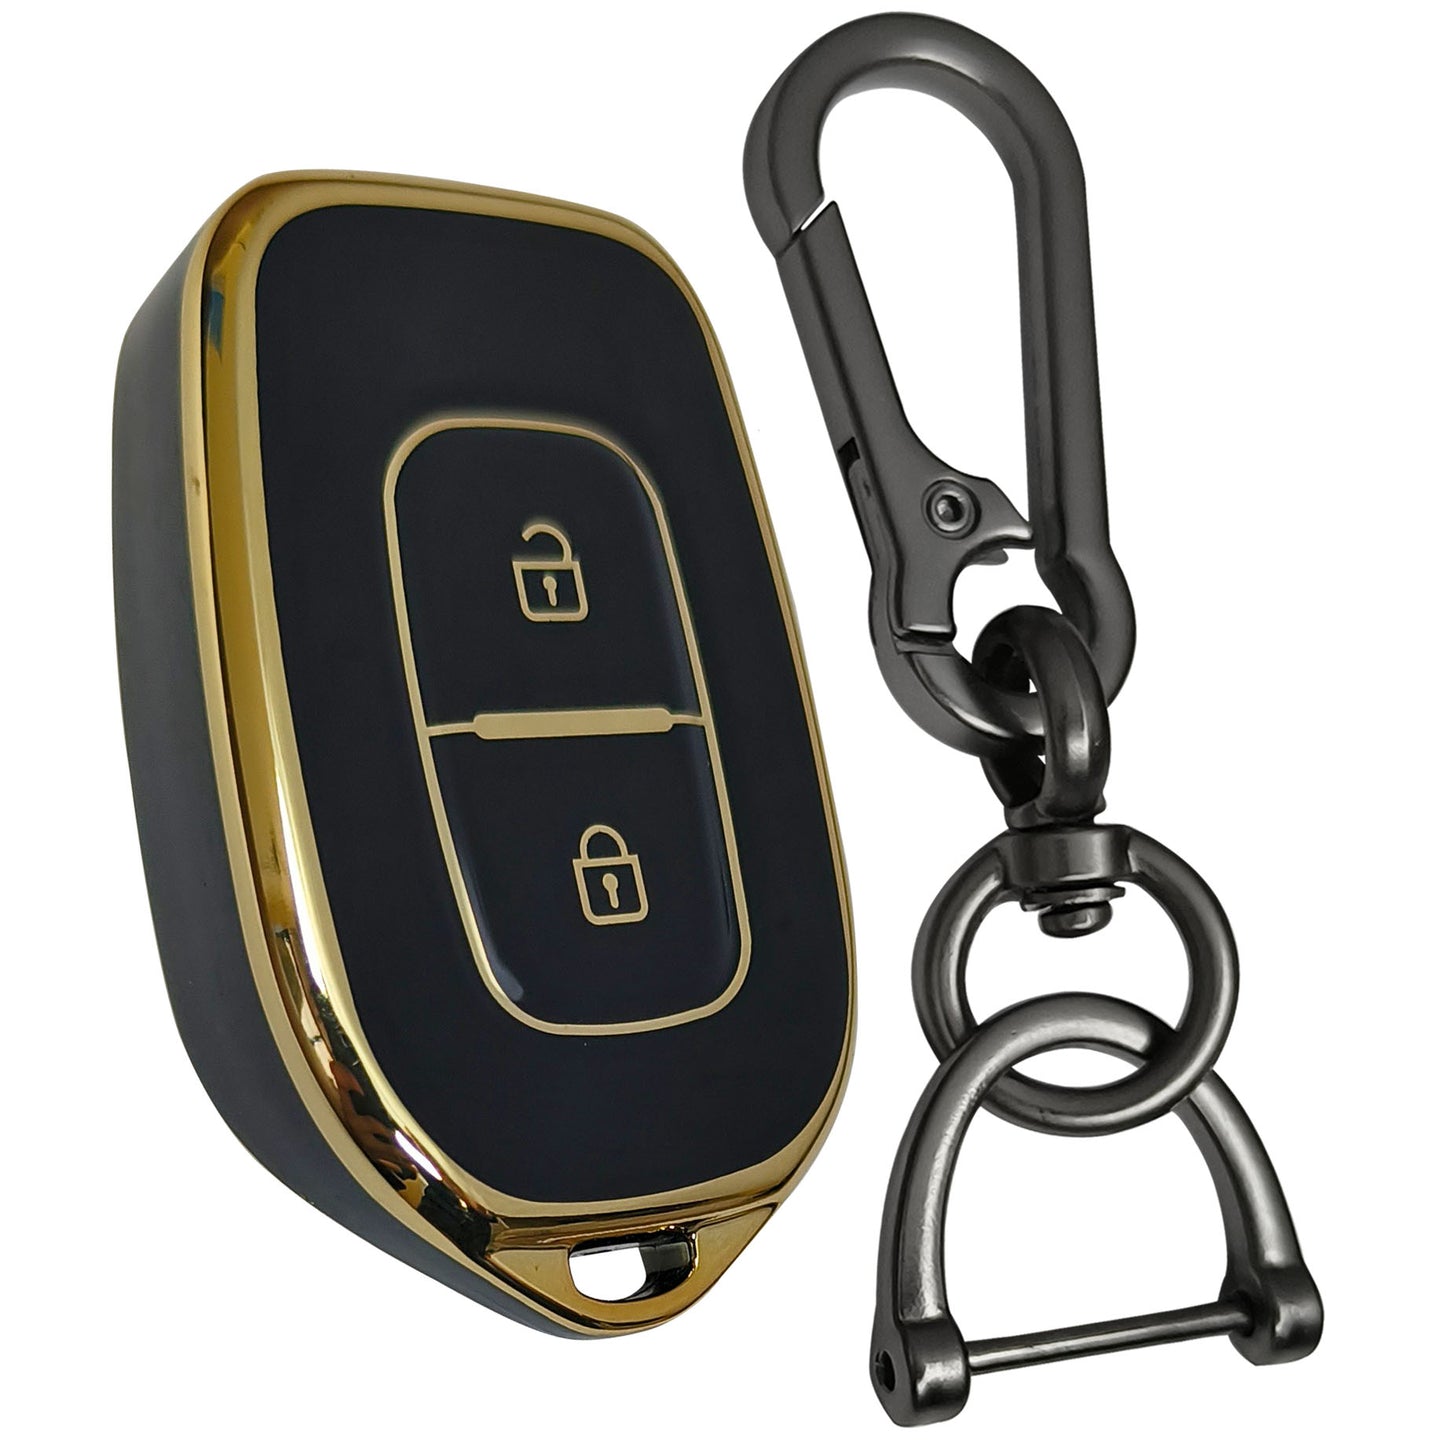 renault kwid kiger duster 2 button remote tpu black gold key cover case accessories keychain